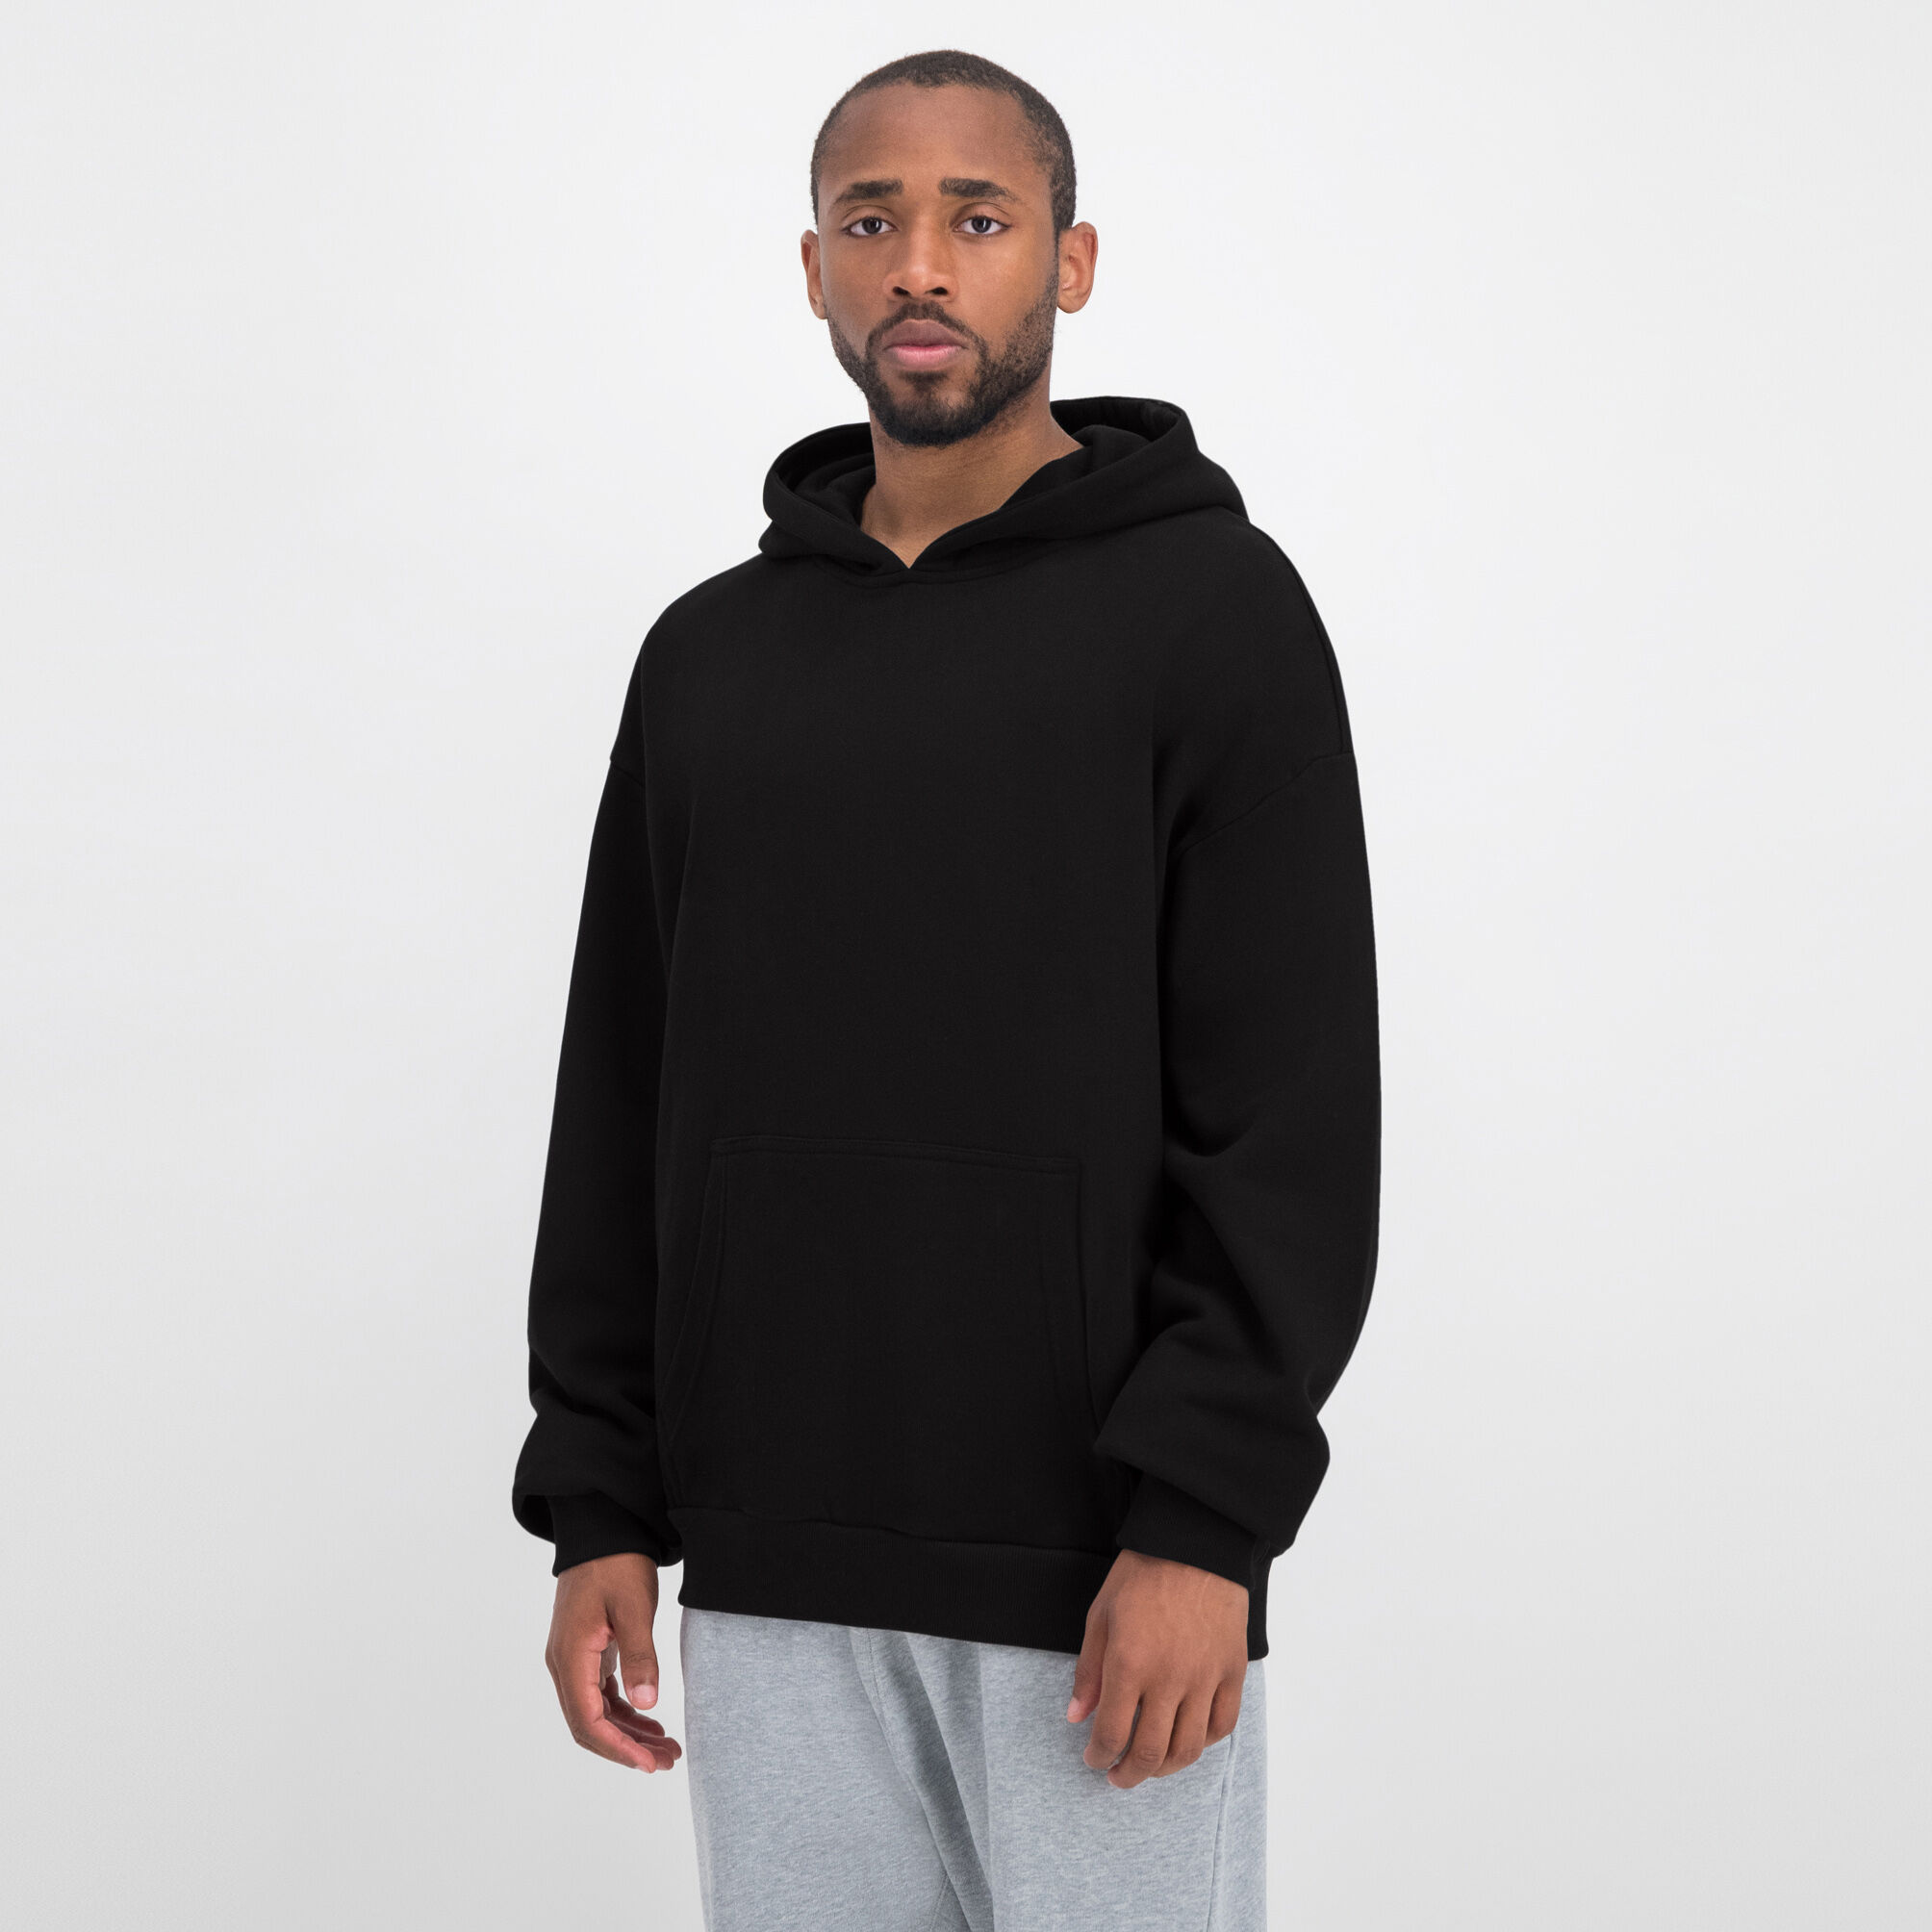 Buy Dusa Painting Heavy Oversize Hoodie for N/A 0.0 on KICKZ.com!